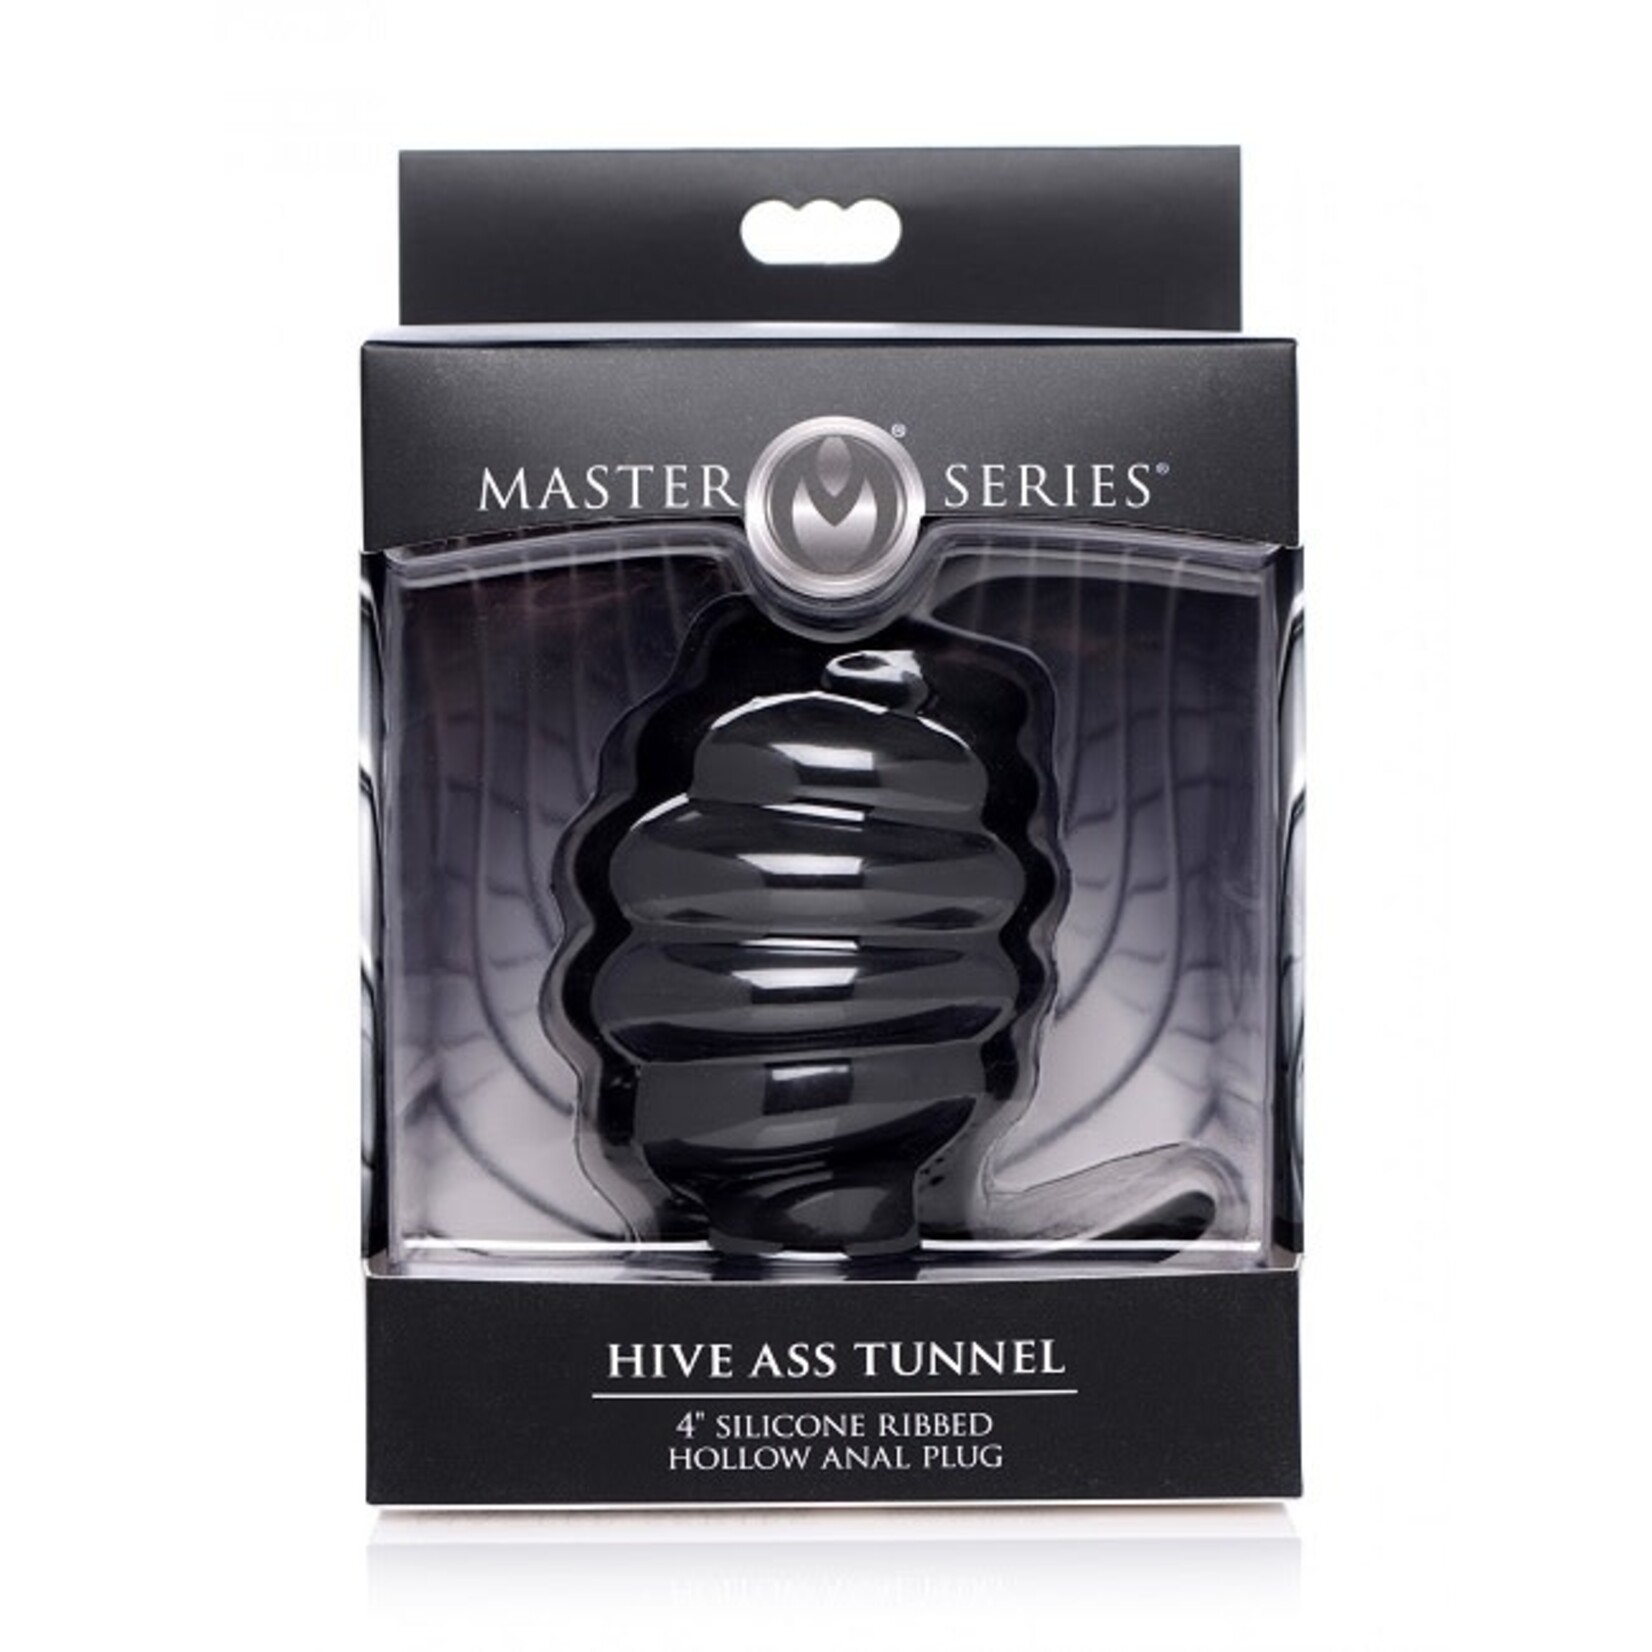 Master Series Master Series Hive Ass Tunnel Silicone Ribbed Hollow Anal Plug - Large